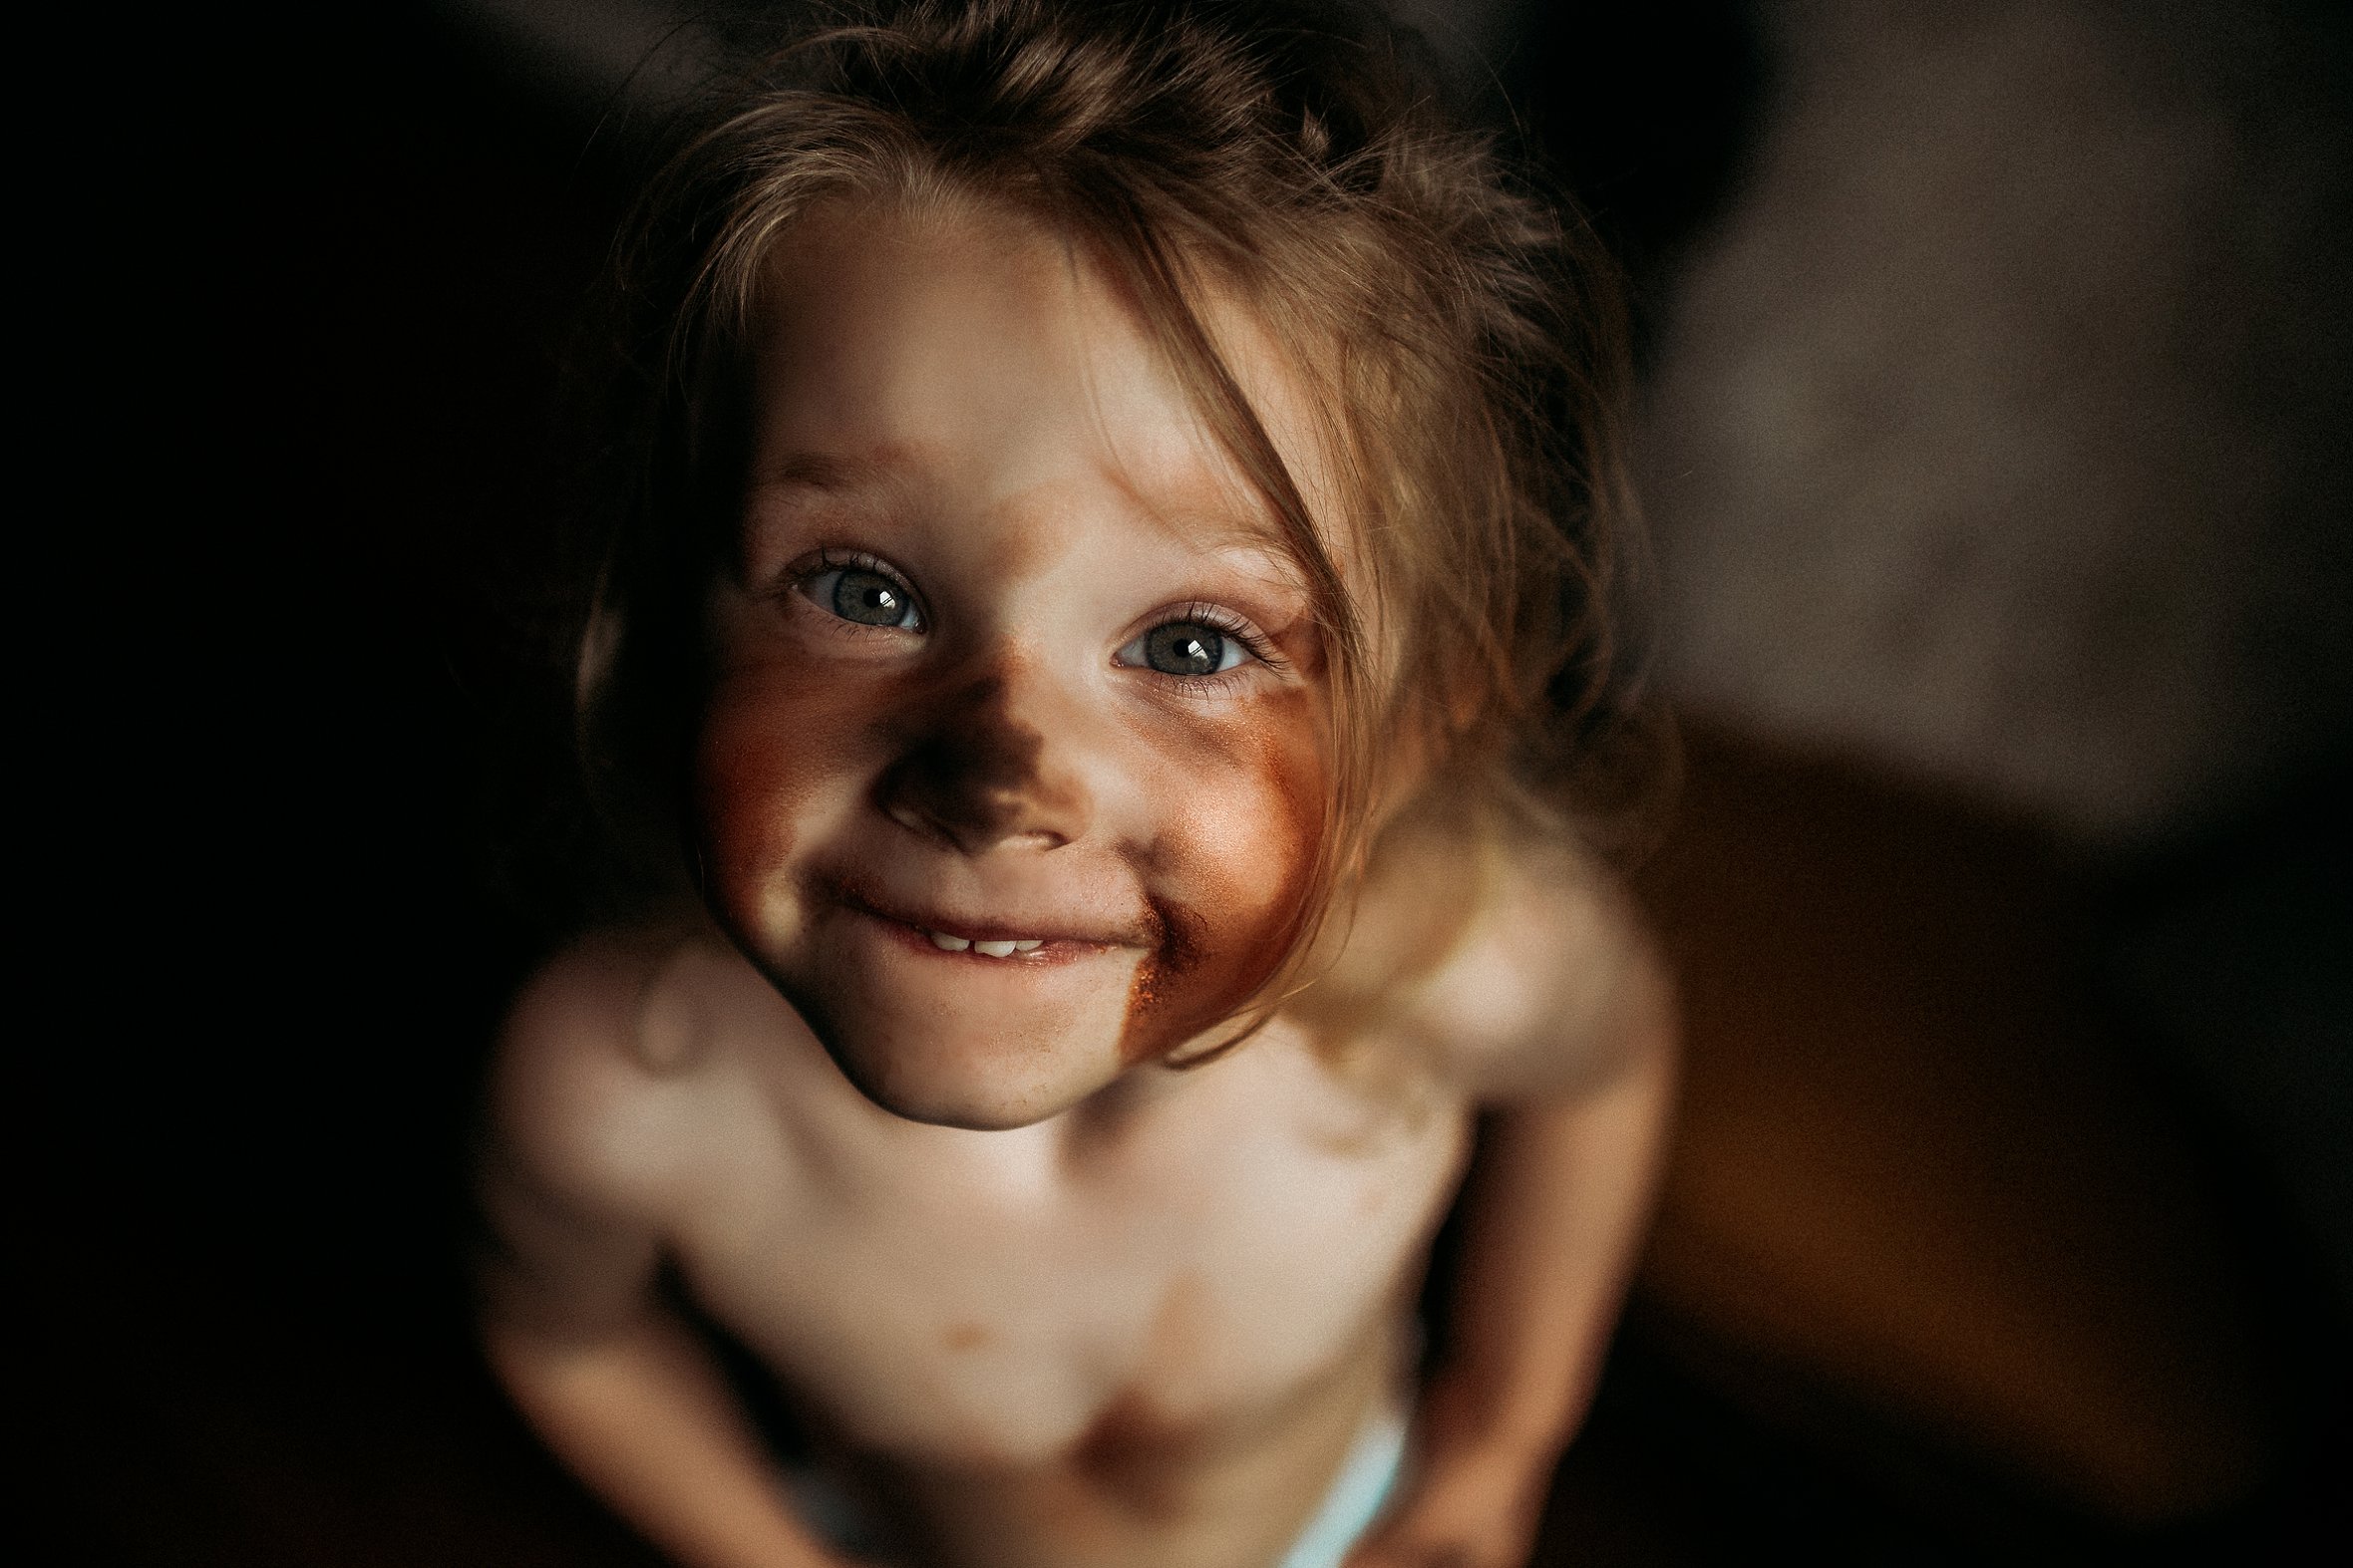 little girl smiling covered in makeup - lifestyle kid - indoor light